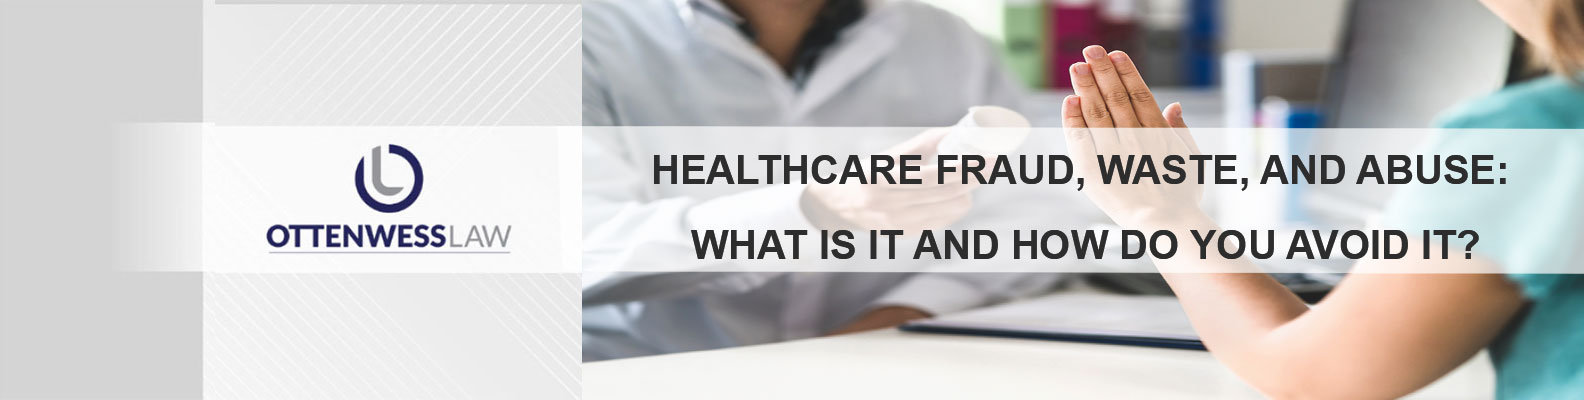 HEALTHCARE FRAUD, WASTE, AND ABUSE-title-image